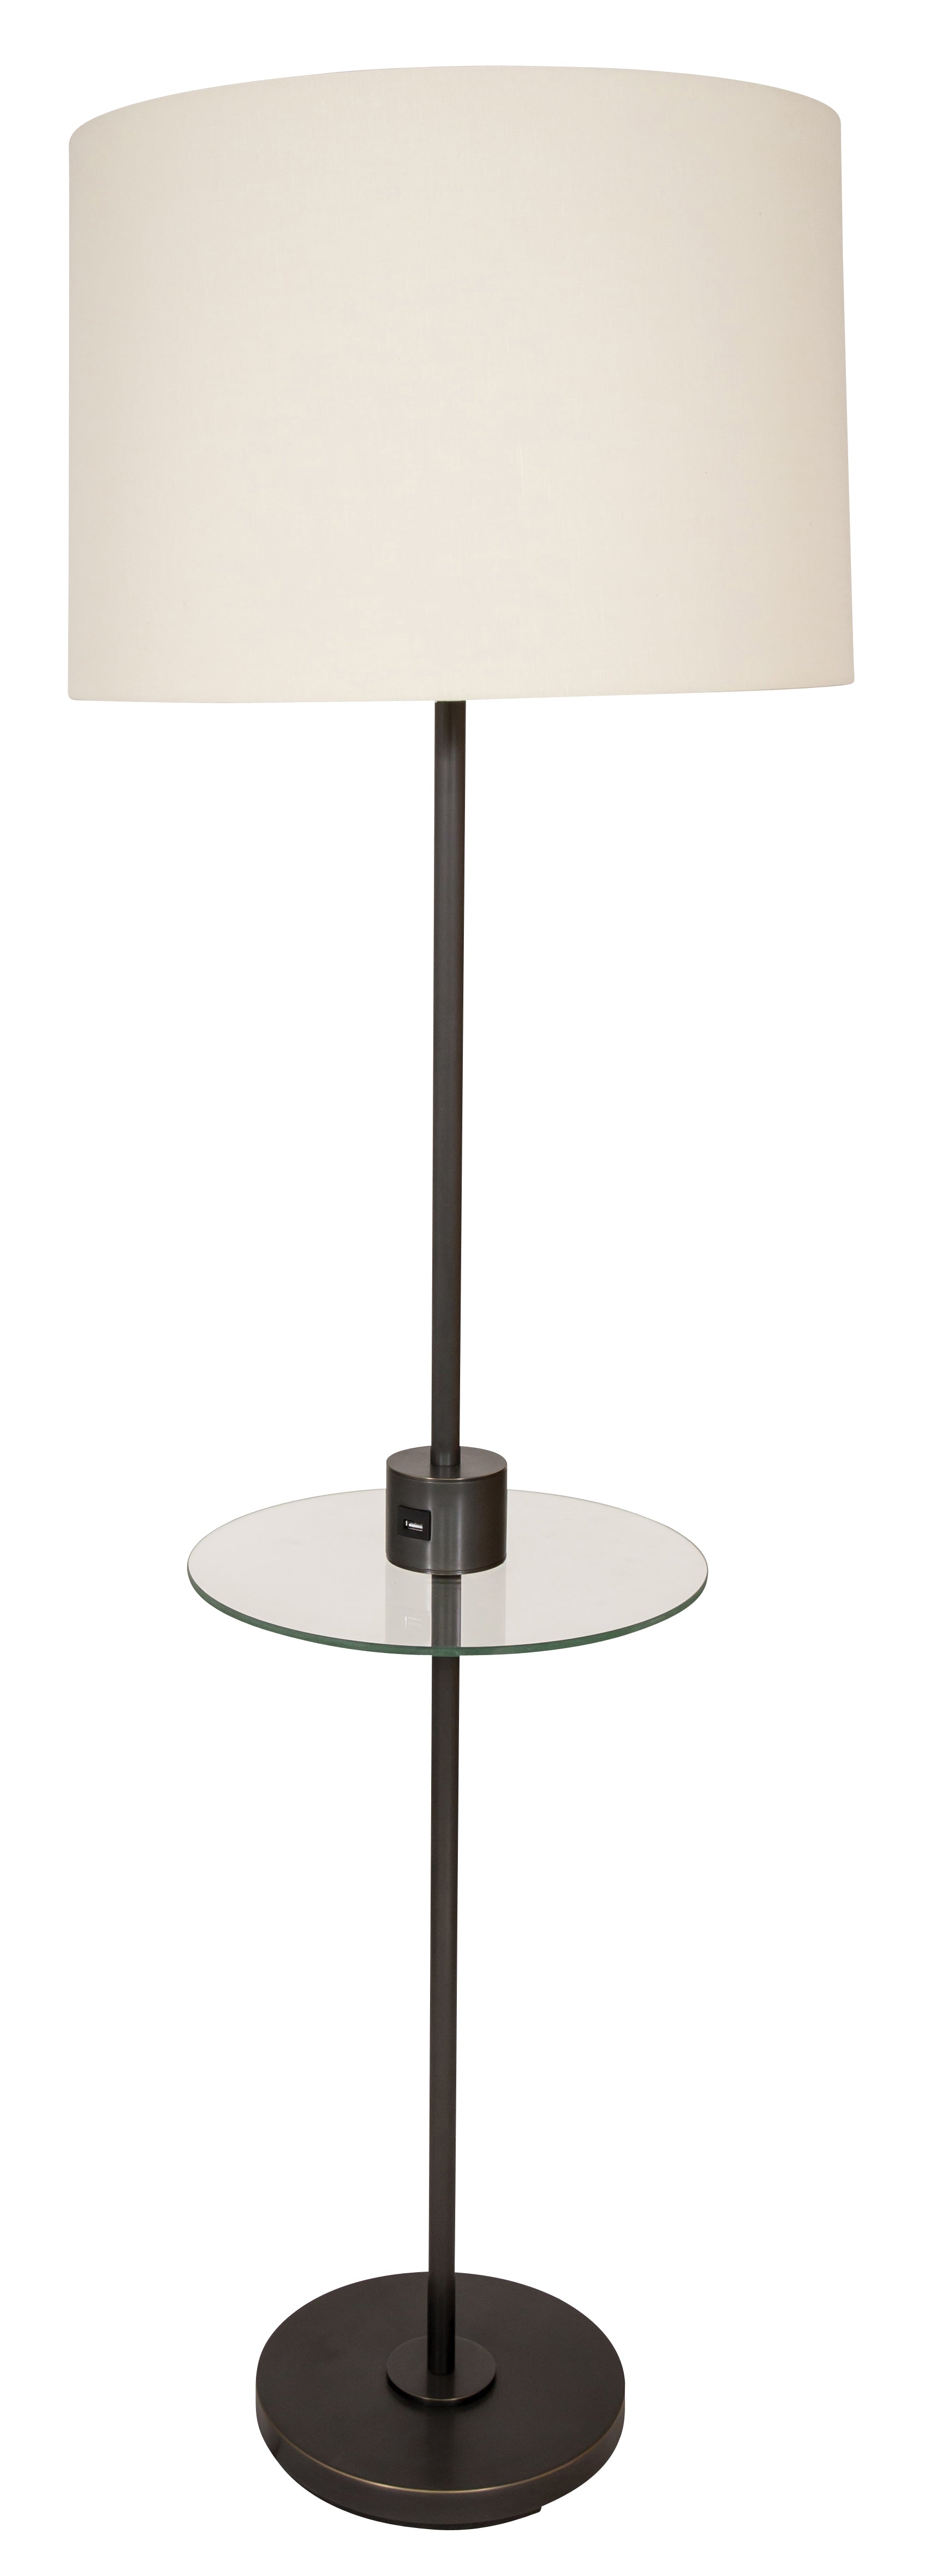 House of Troy Brandon Floor Lamp with USB Port in Oil Rubbed Bronze BR102-OB